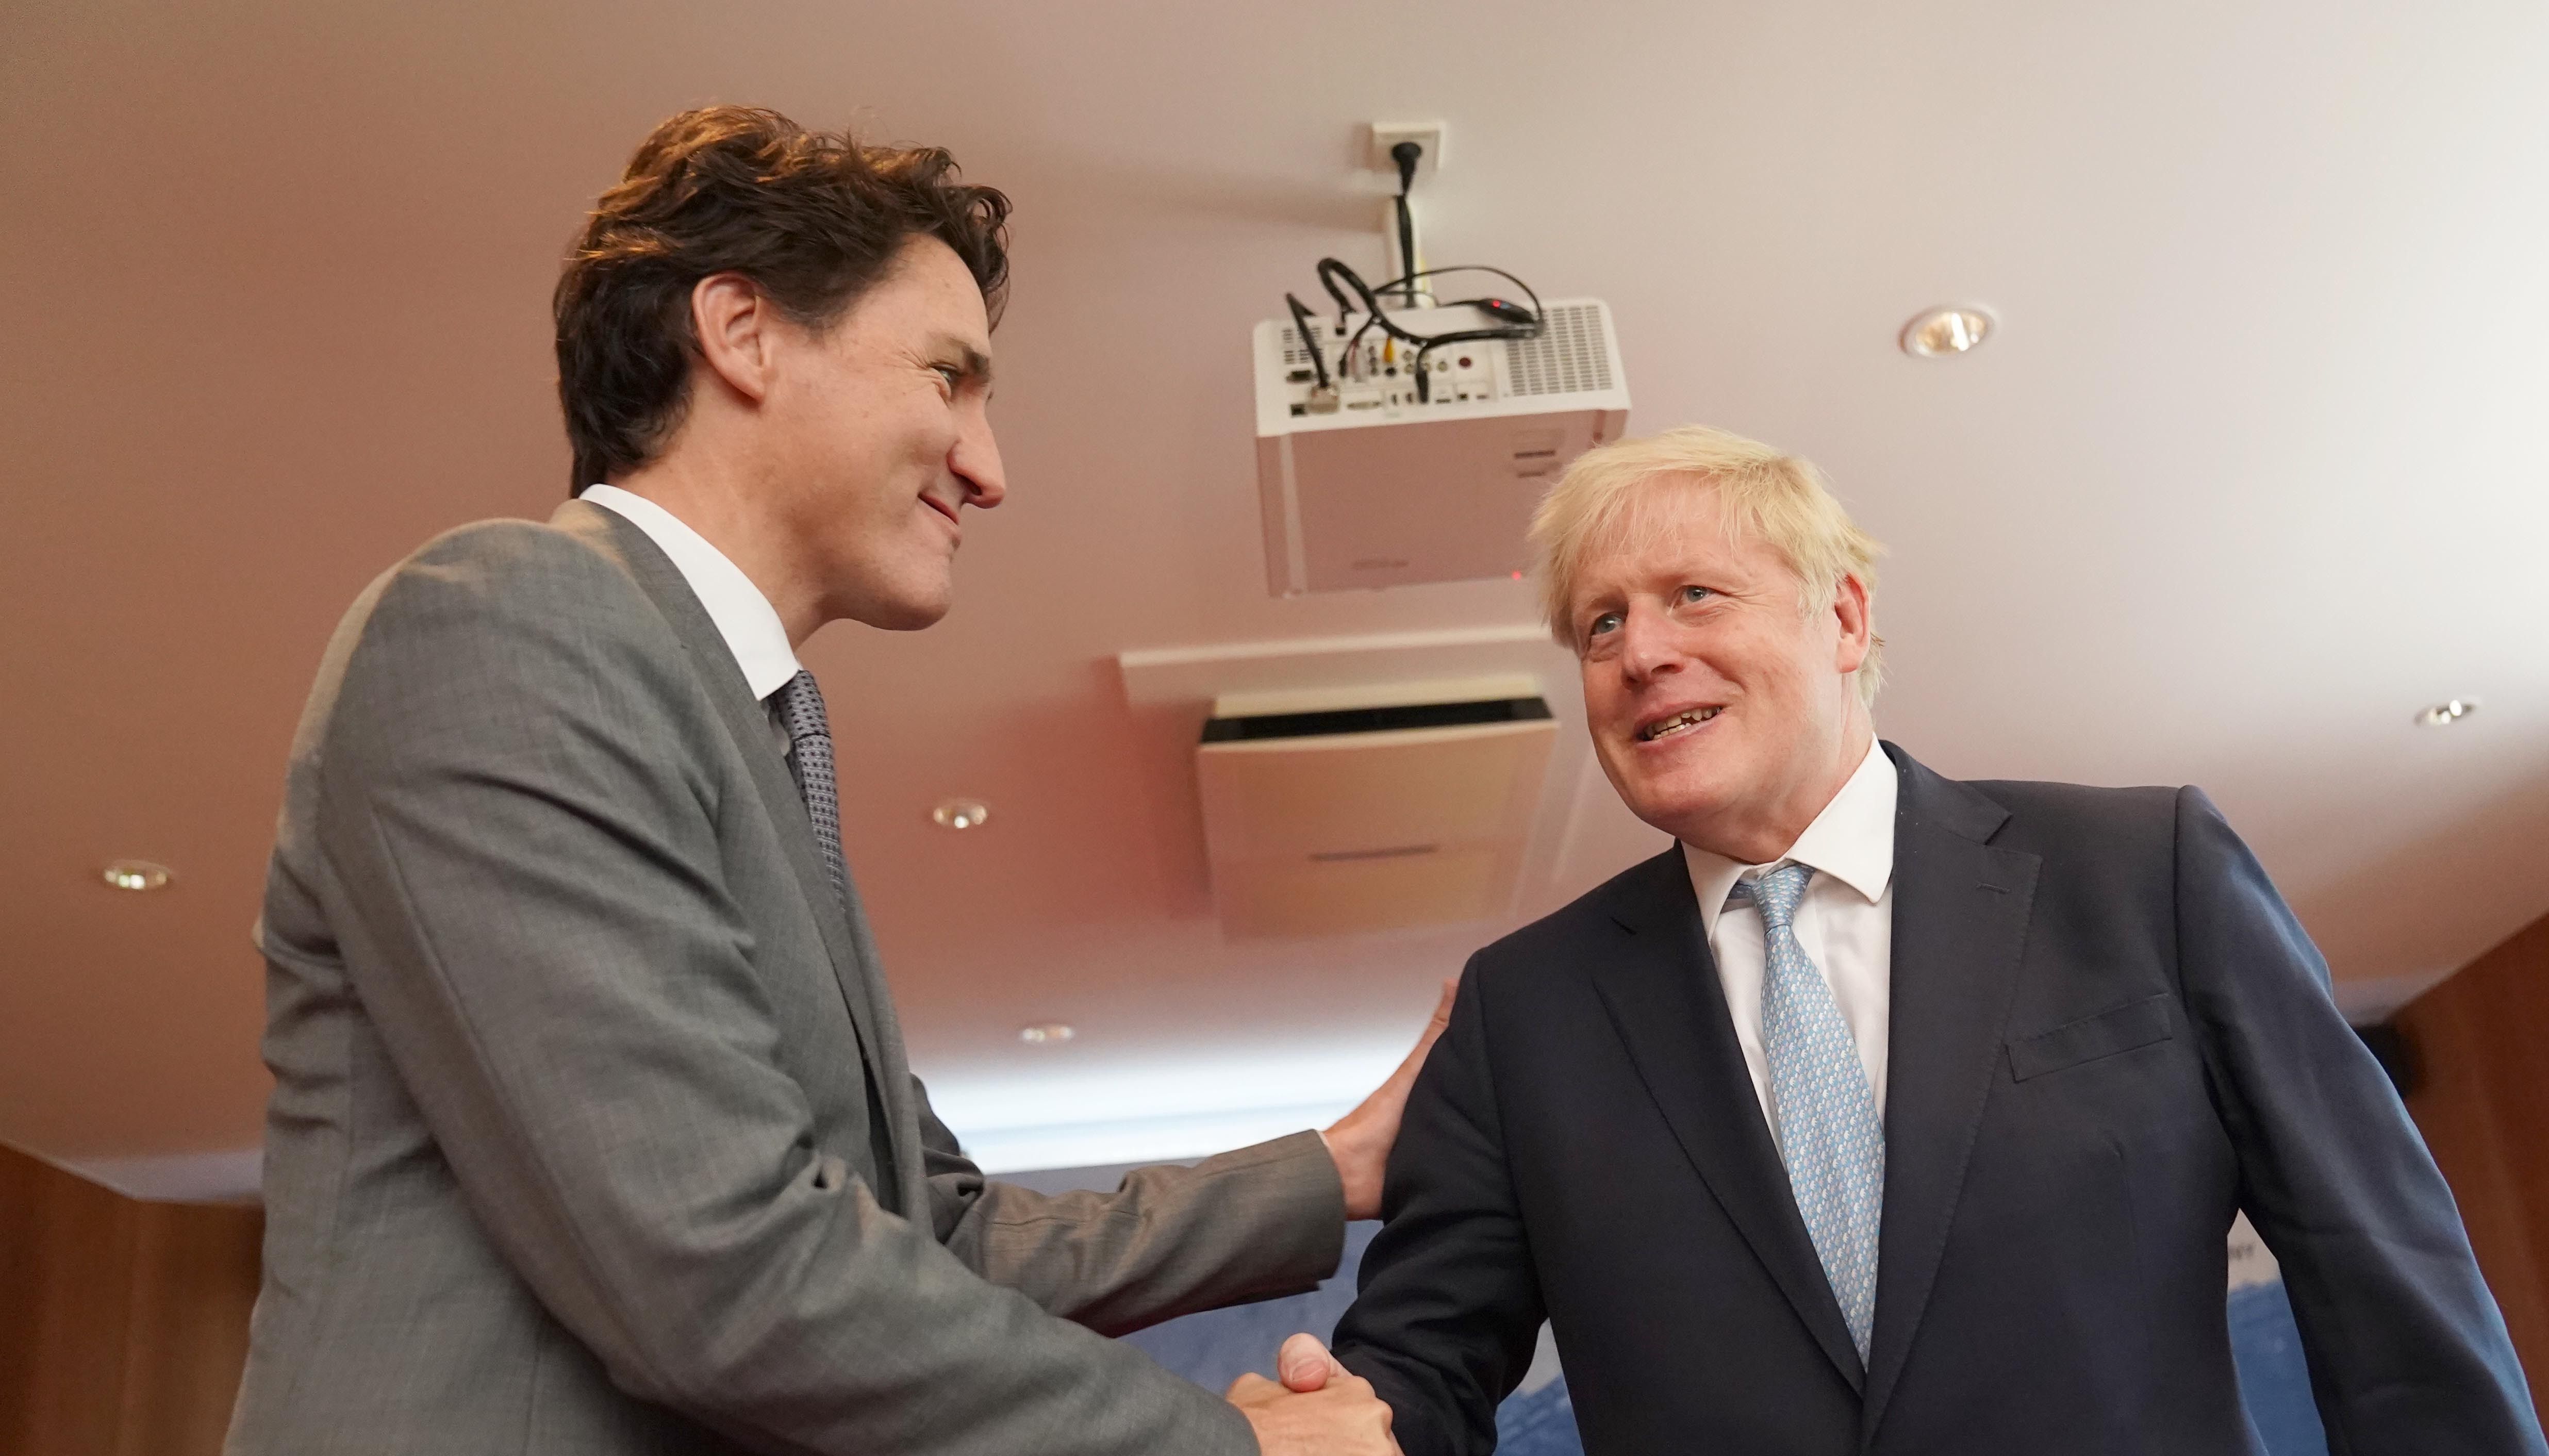 Prime Minister Boris Johnson holds a bilateral meeting with Canadian Prime Minister Justin Trudeau during the G7 summit in Schloss Elmau, in the Bavarian Alps, Germany. Picture date: Sunday June 26, 2022.